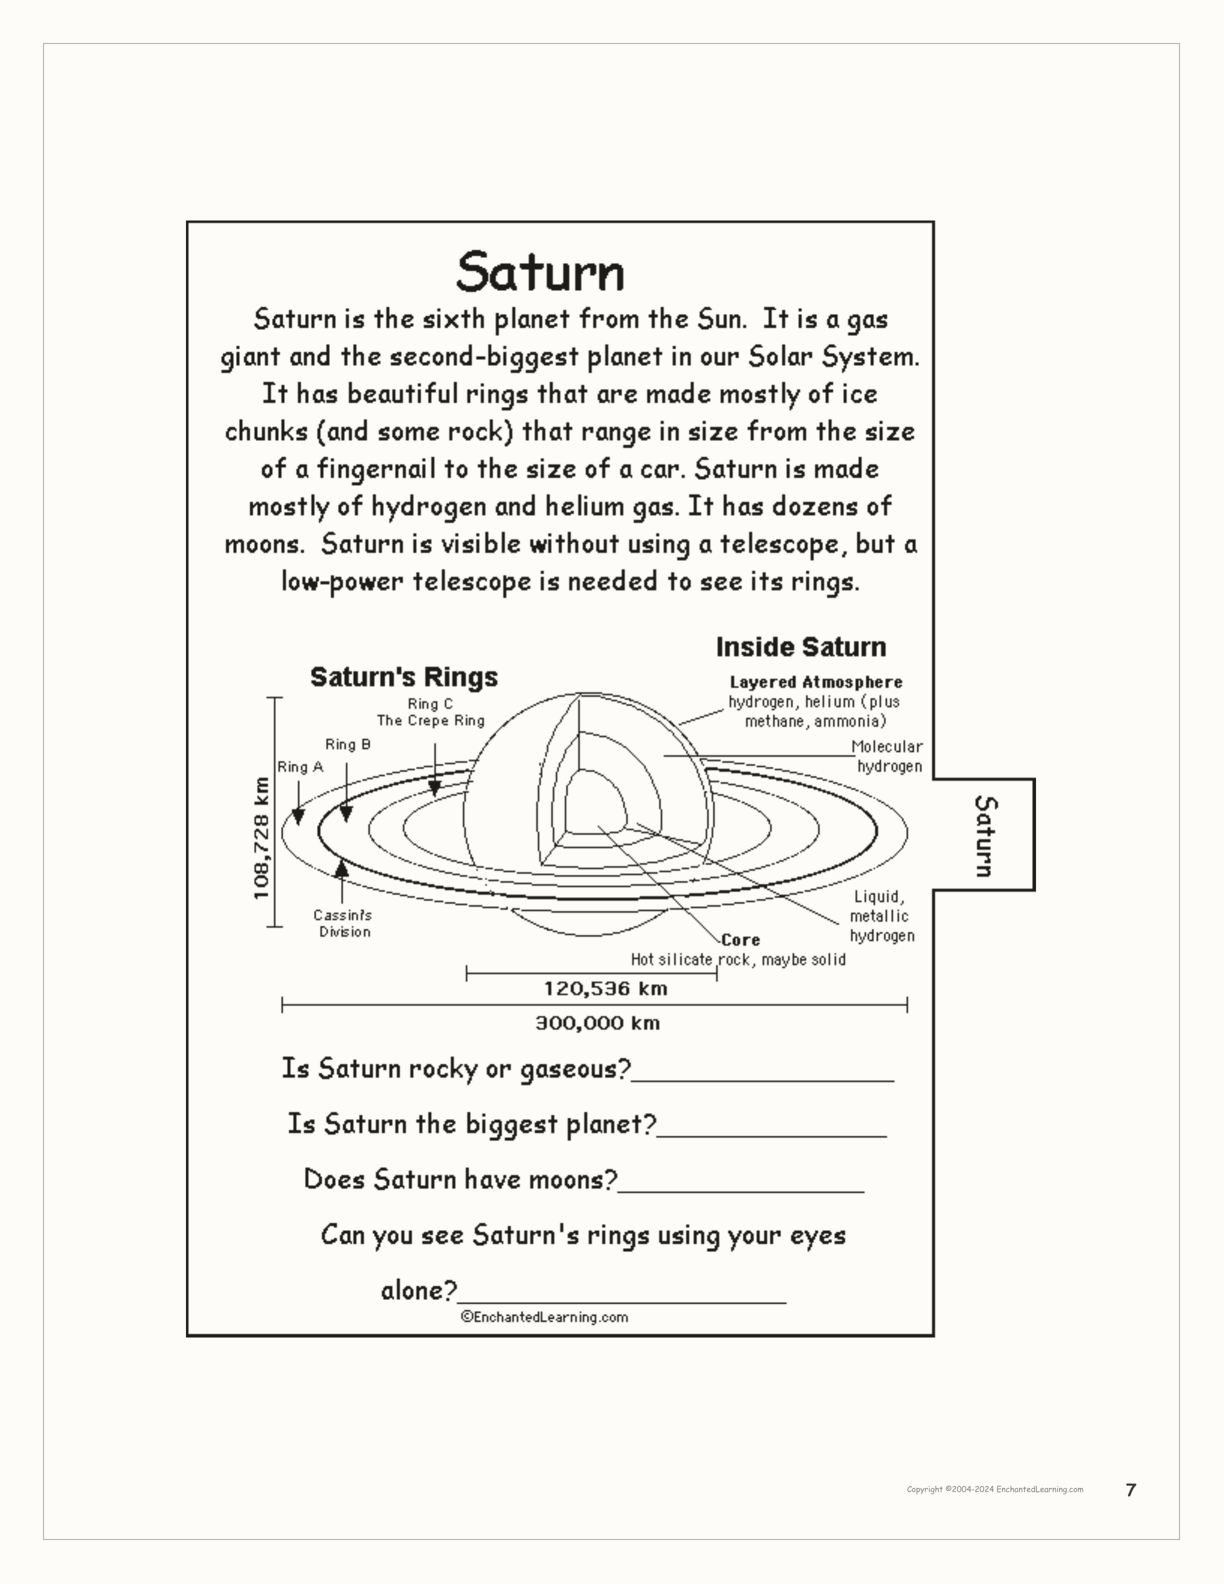 The Planets of our Solar System Book interactive printout page 7